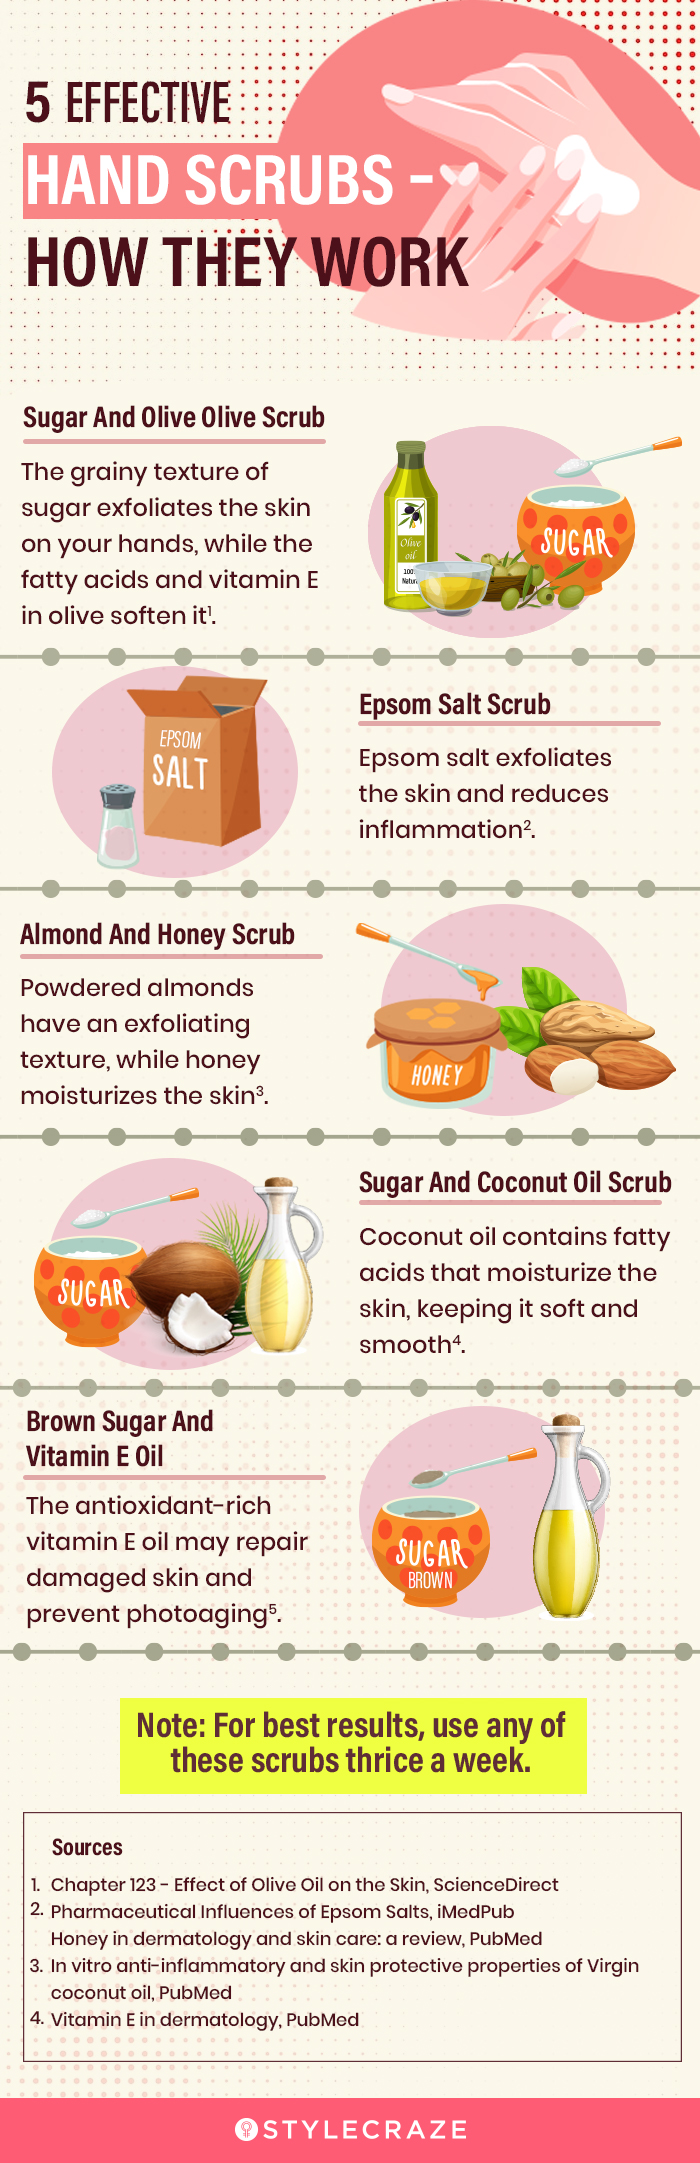 5 effective hand scrubs – how they work [infographic]